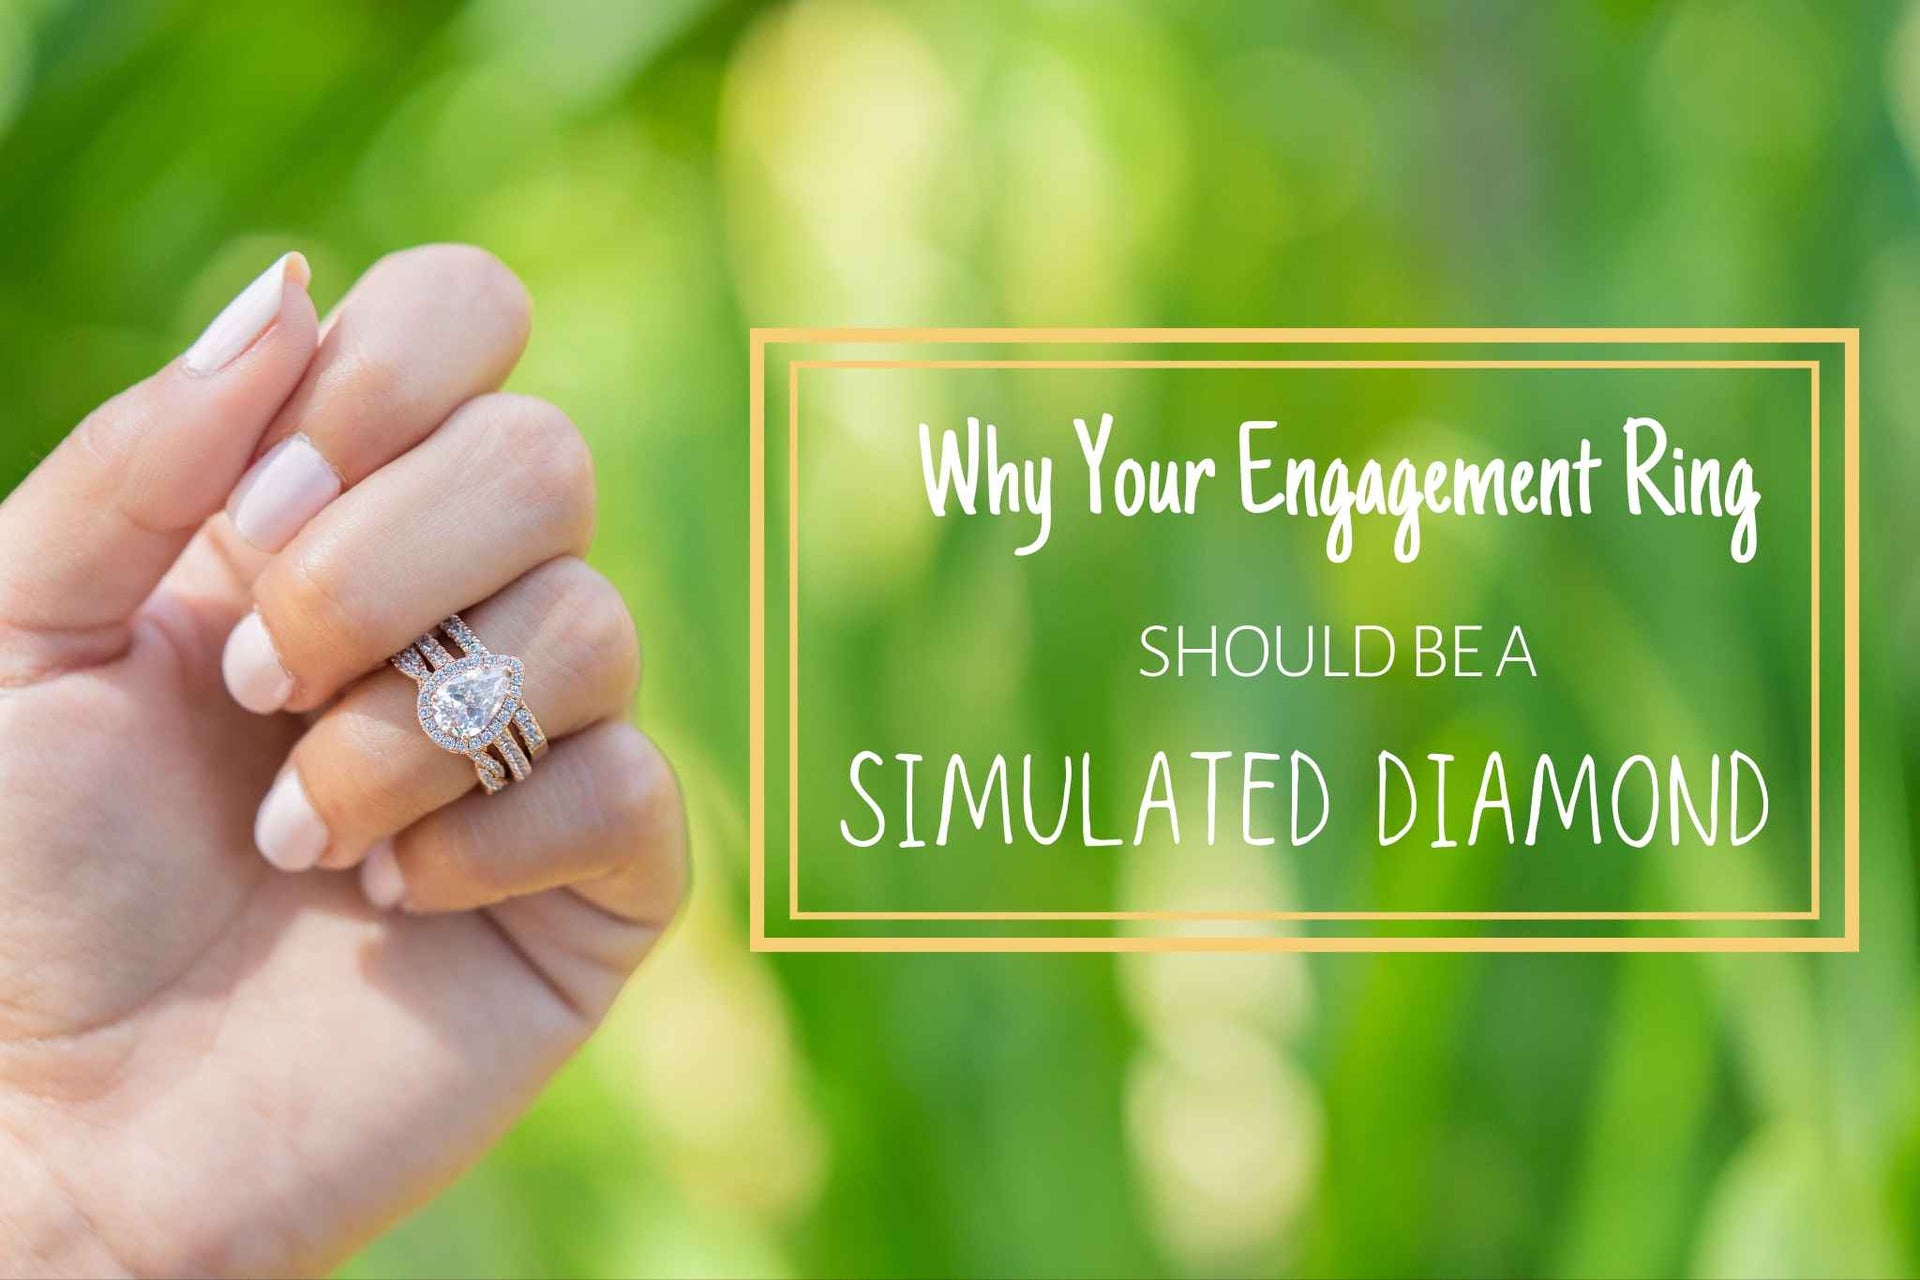 Why Your Engagement Ring Should Be a Simulated Diamond